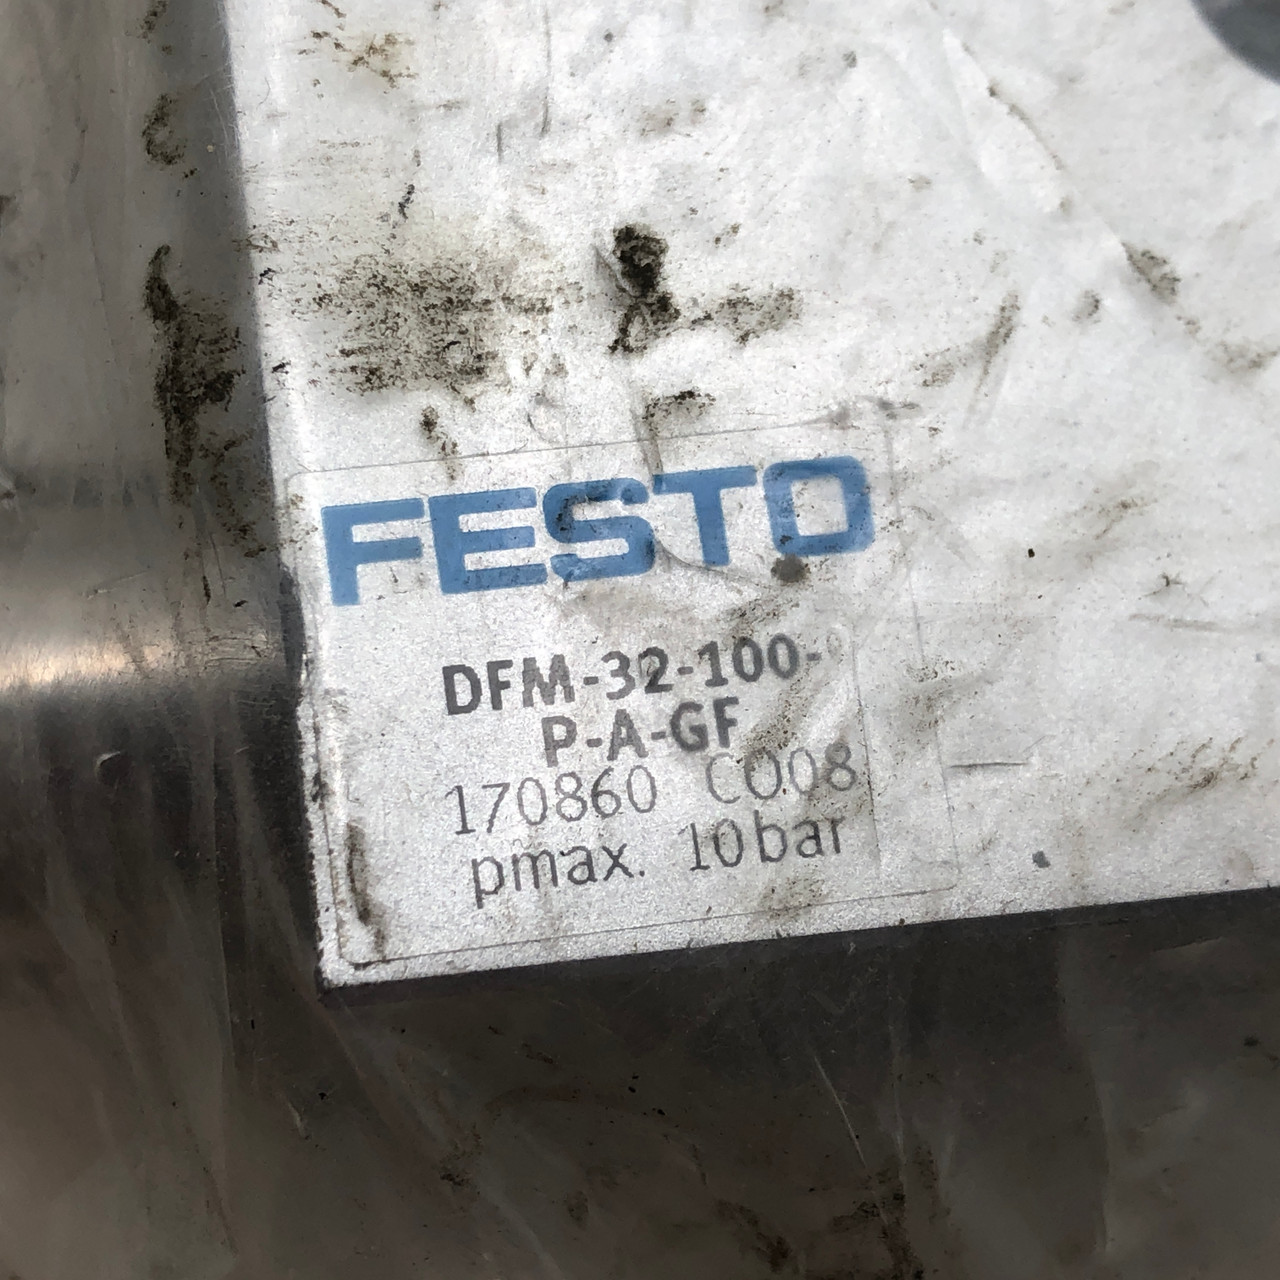 FESTO DFM-32-100-P-A-GF (GUIDED DRIVE CYLINDER) NEW